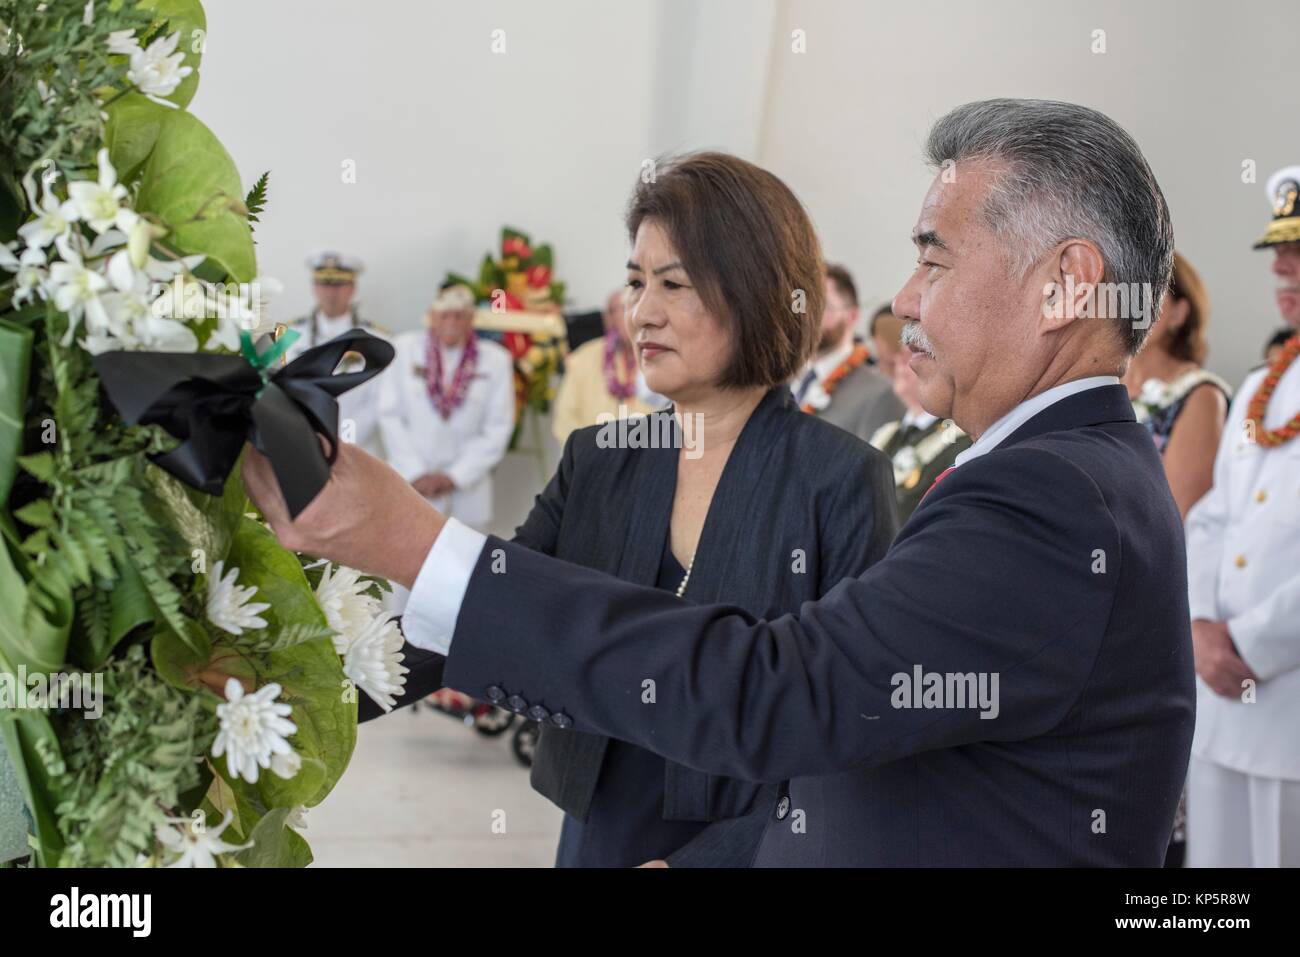 U.S. Hawaii Governor David Ige pays his respects to fallen service members at a floral tribute aboard the USS Arizona Memorial during the 76th Commemoration of the attacks on Pearl Harbor and Oahu at the December 7, 2017 in Honolulu, Hawaii.  (photo by Katarzyna Kobiljak via Planetpix) Stock Photo